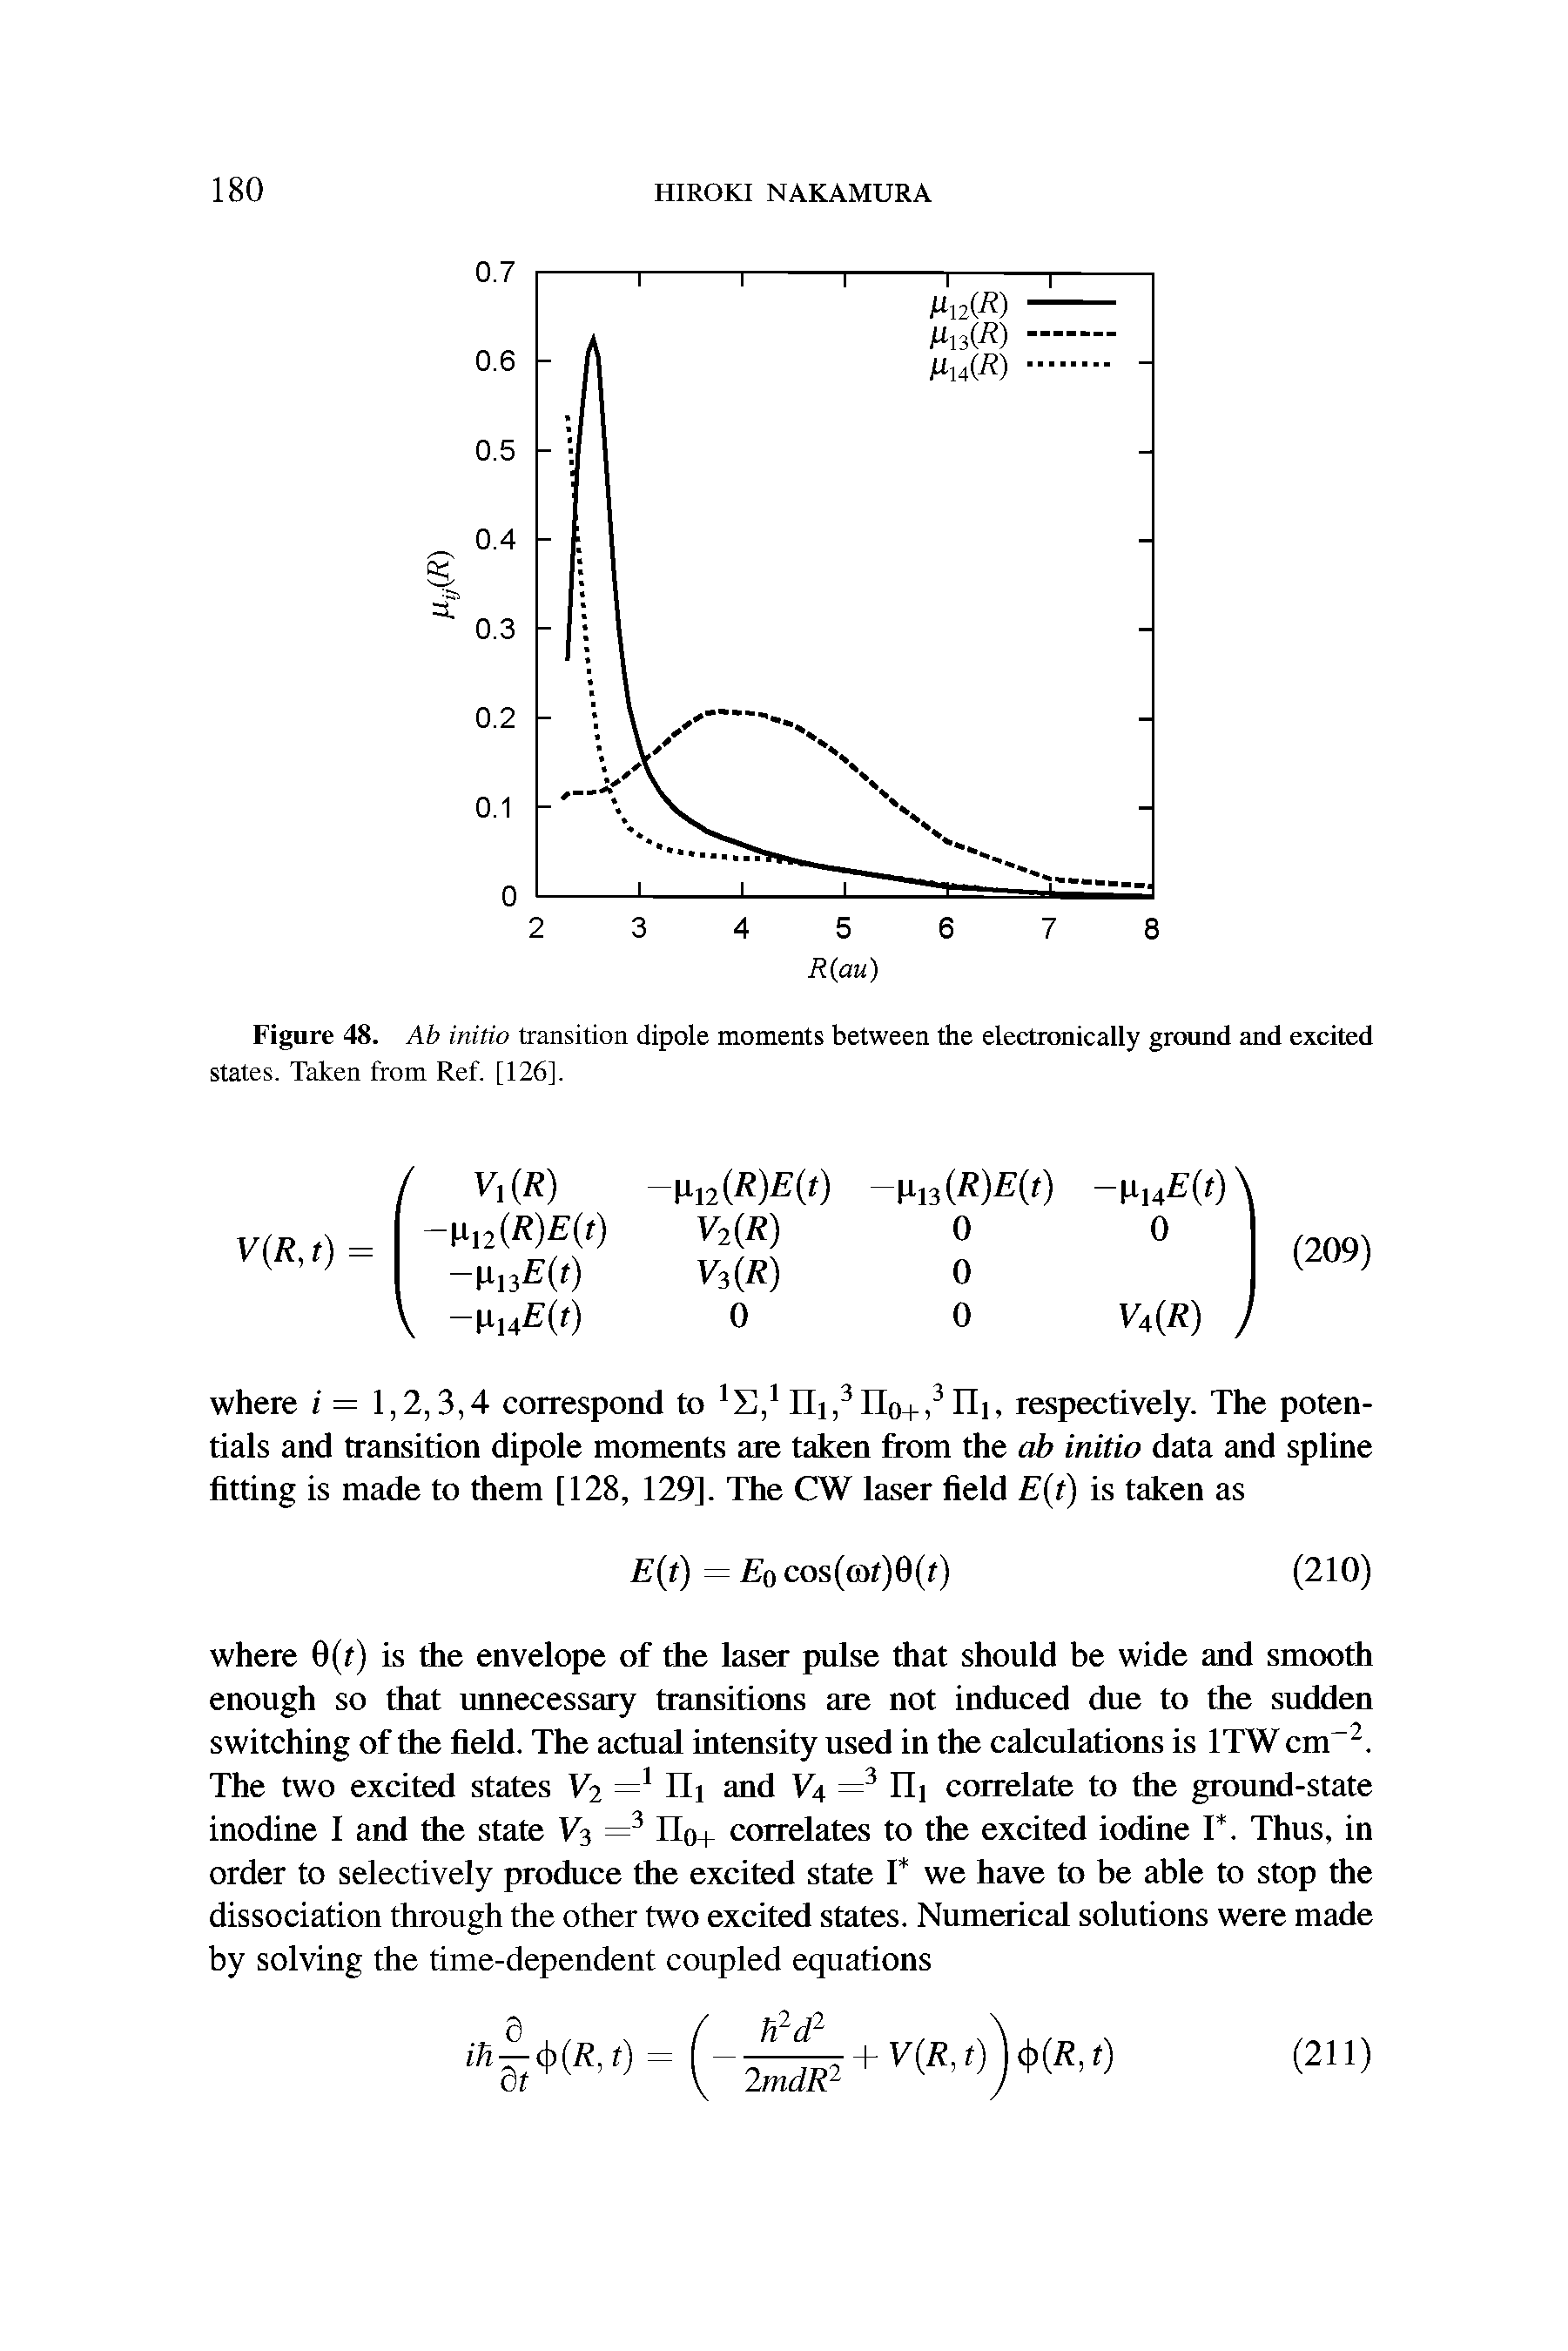 Figure 48. Ab initio transition dipole moments between the electronically ground and excited states. Taken from Ref. [126].